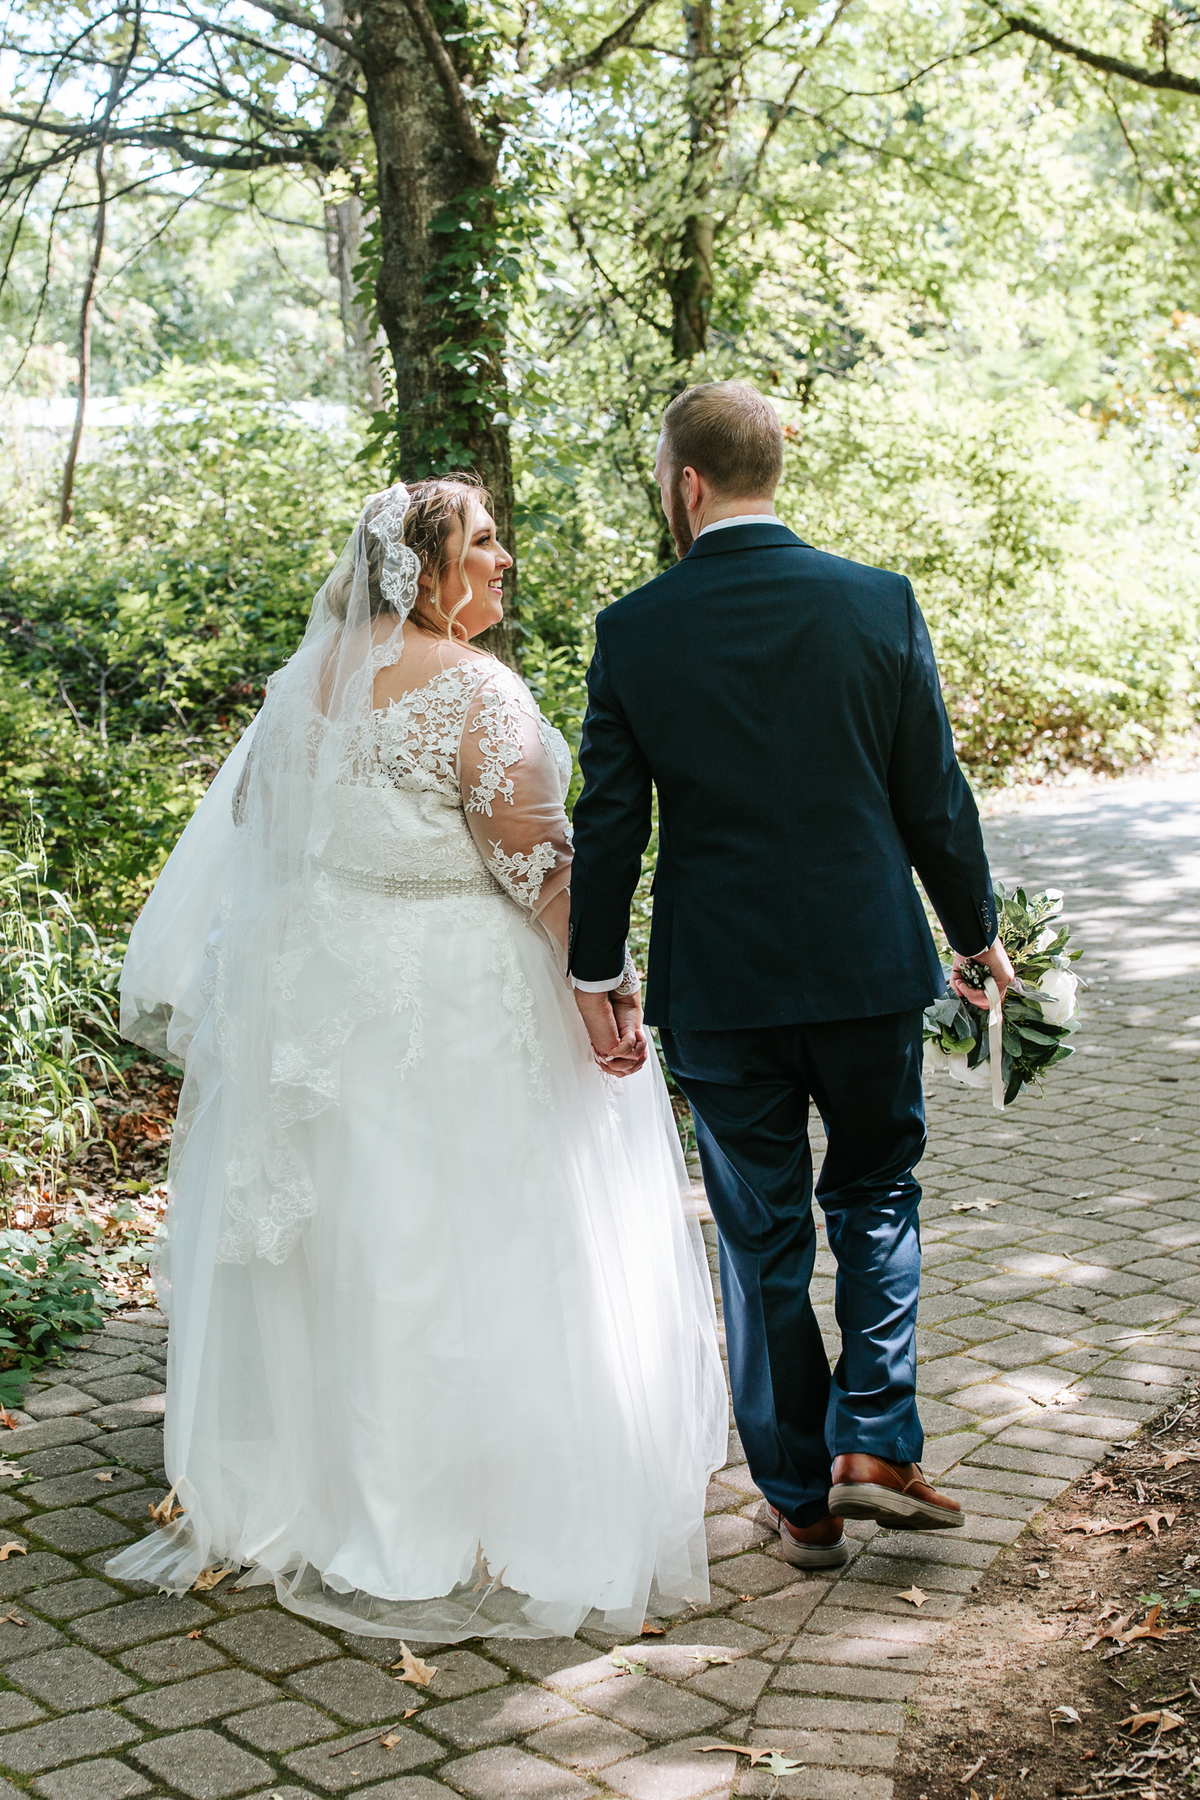 Intimate Backyard Wedding | Knoxville, TN  | Carly Crawford Photography | Knoxville Wedding, Couples, and Portrait Photographer-324482